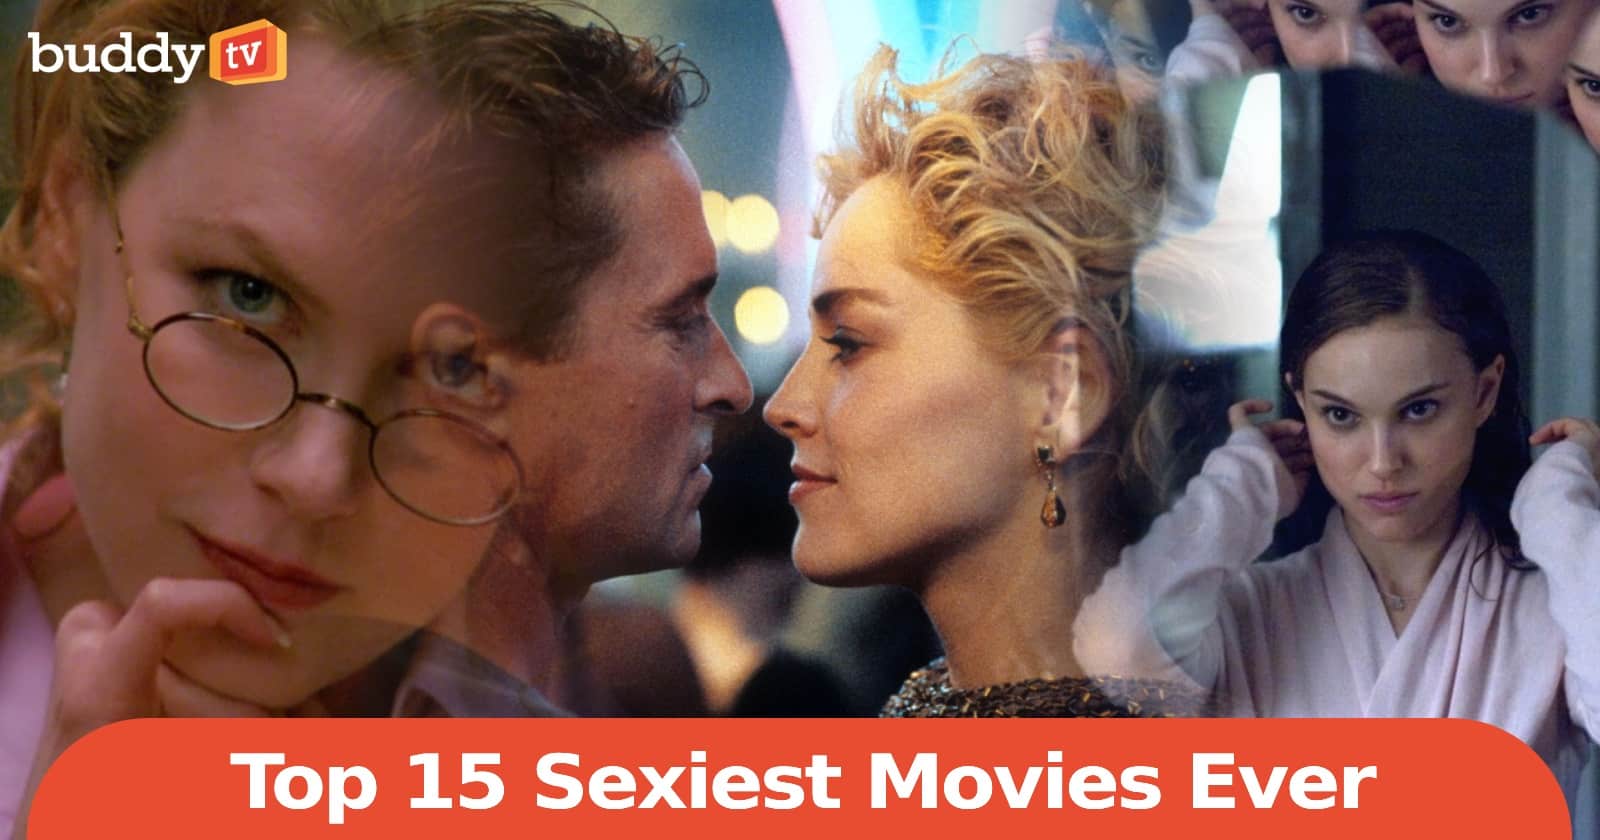 Top 15 Sexiest Movies Ever: My Exploration of Cinematic Seduction